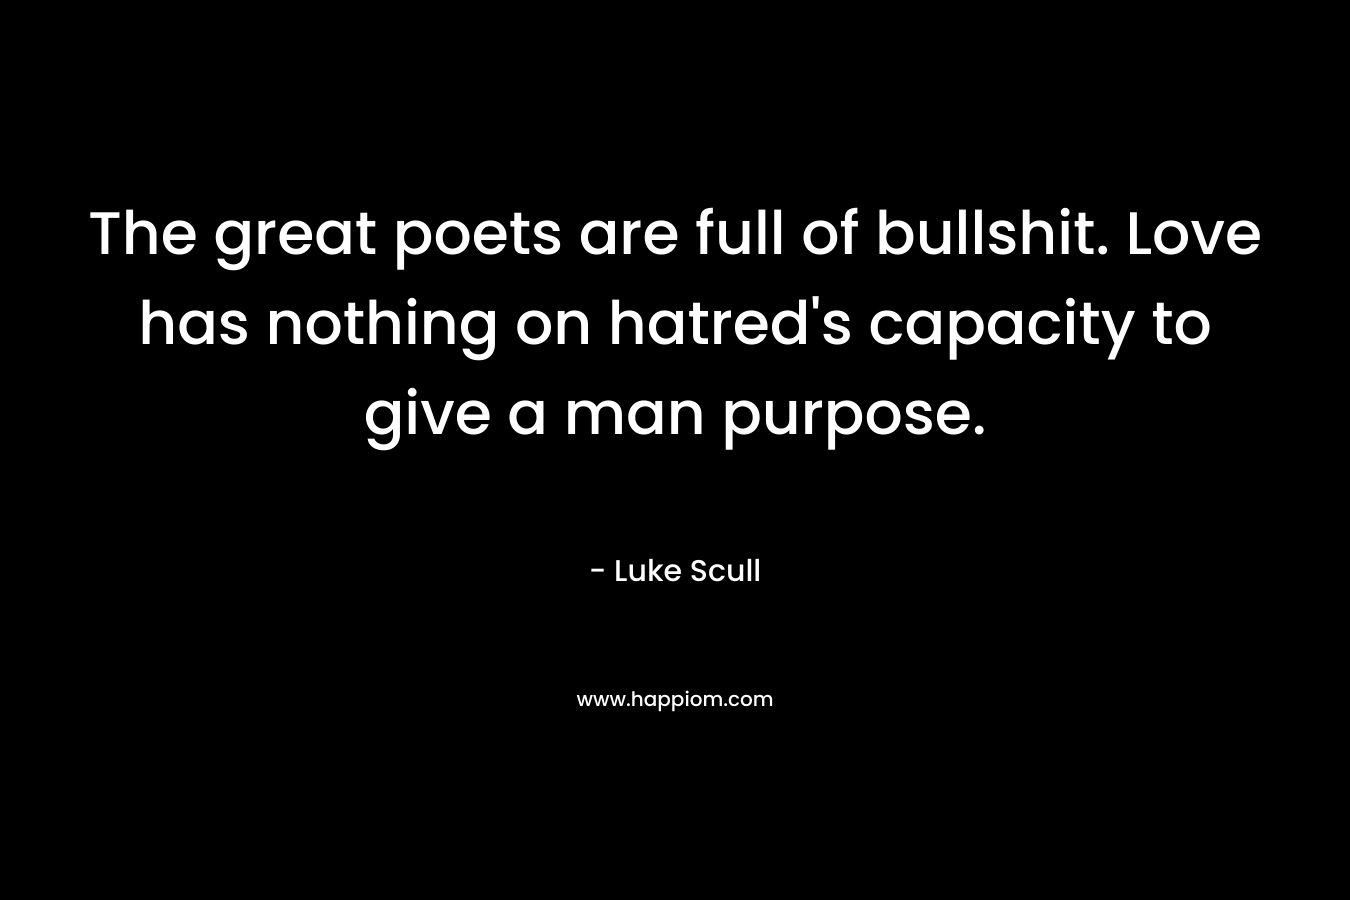 The great poets are full of bullshit. Love has nothing on hatred's capacity to give a man purpose.